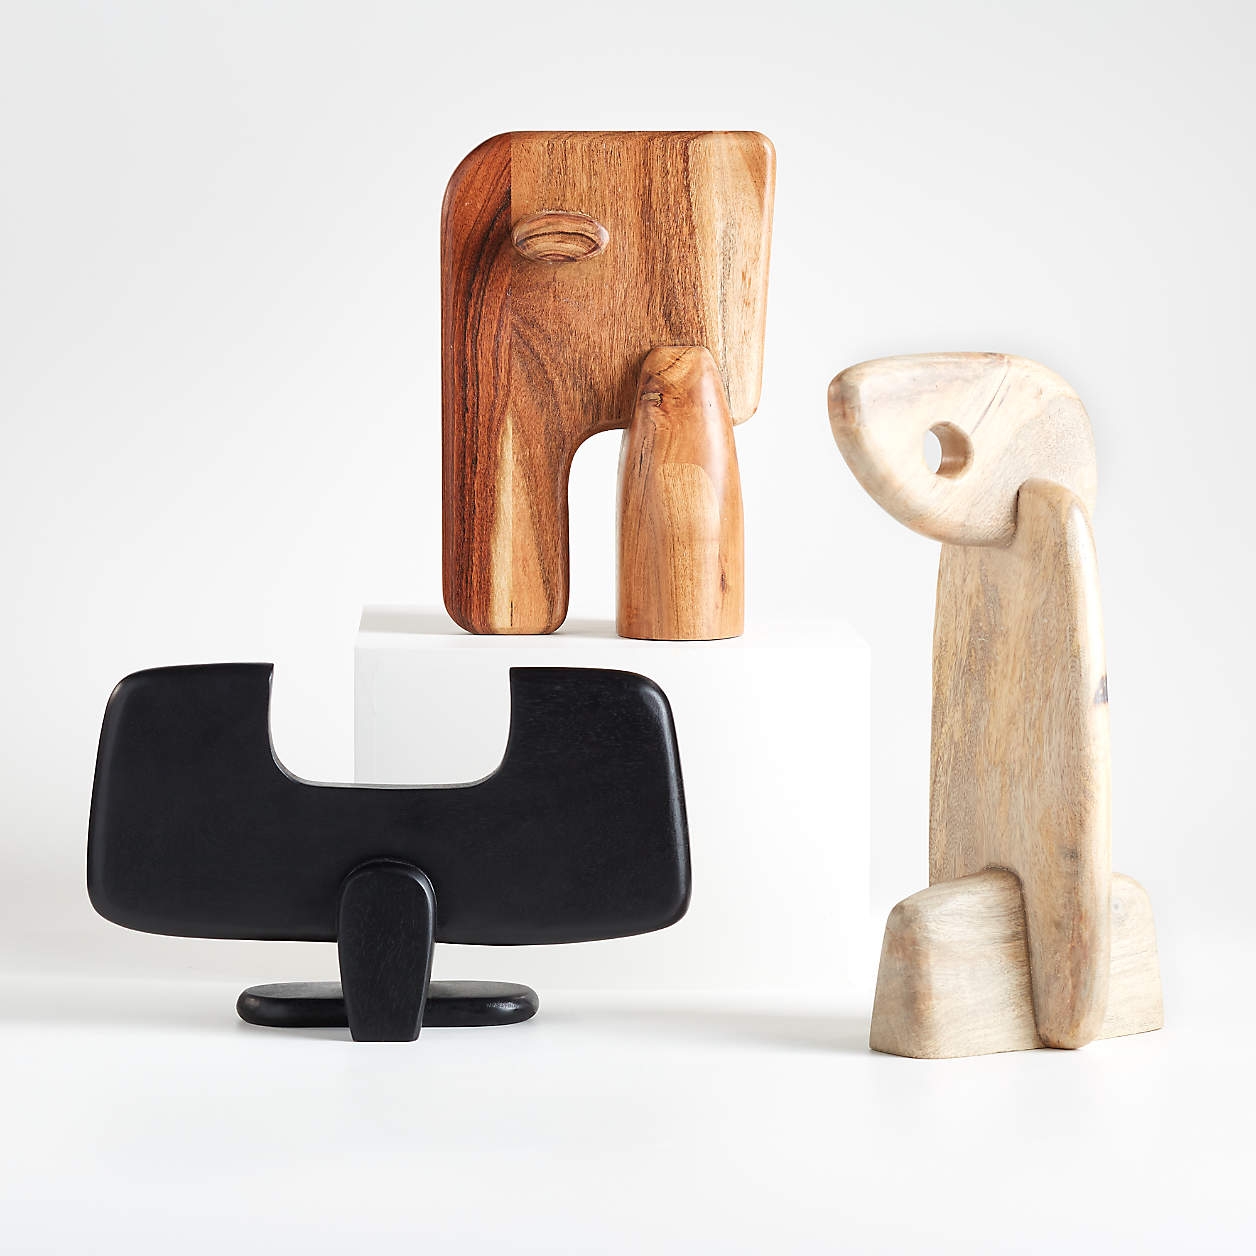 Abstract Wood Elephant Sculpture - Image 1